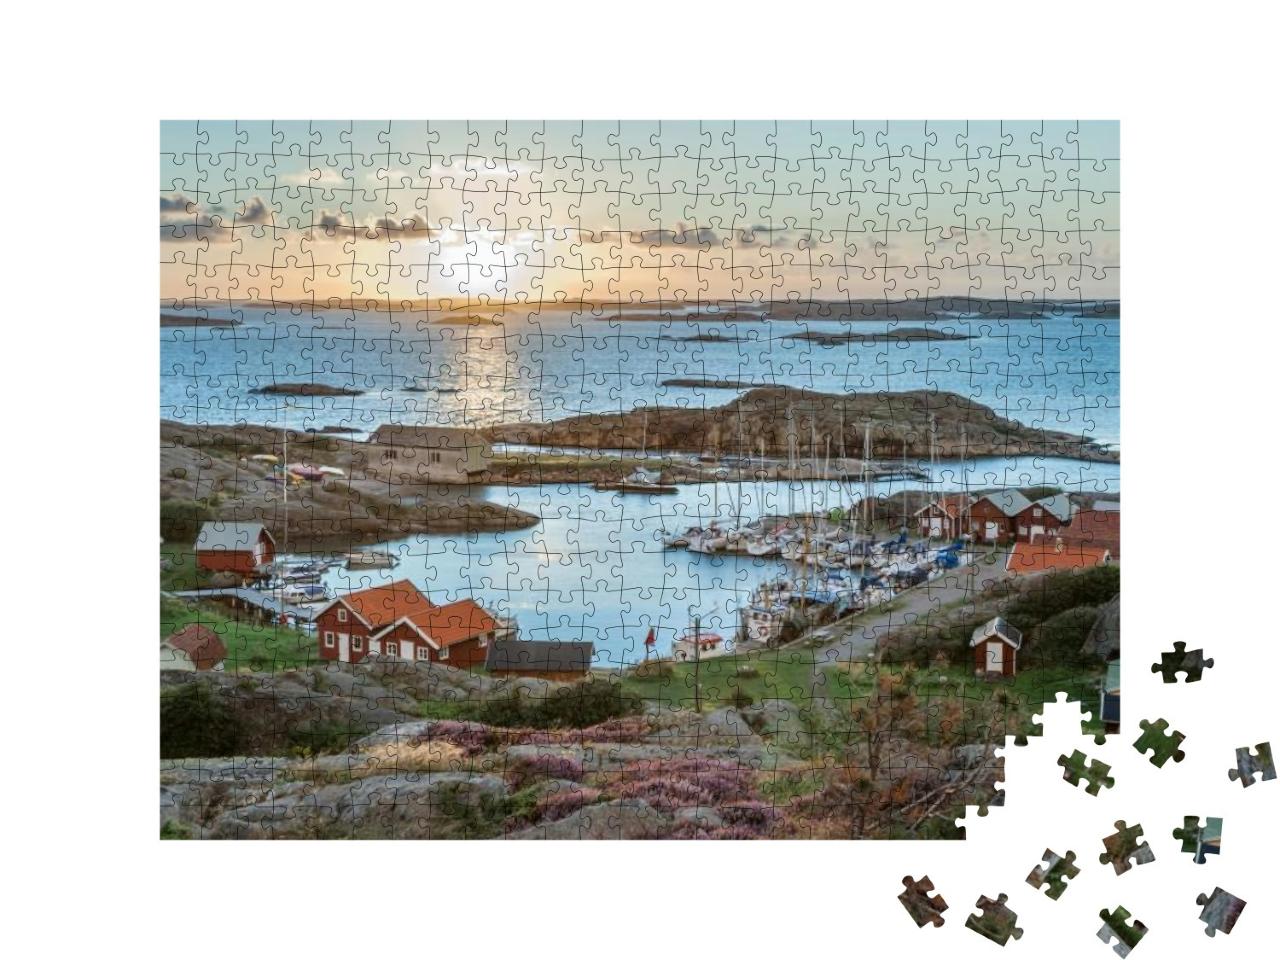 Fishing Harbor of Swedish Skerry Island of Ramsoe, Wester... Jigsaw Puzzle with 500 pieces